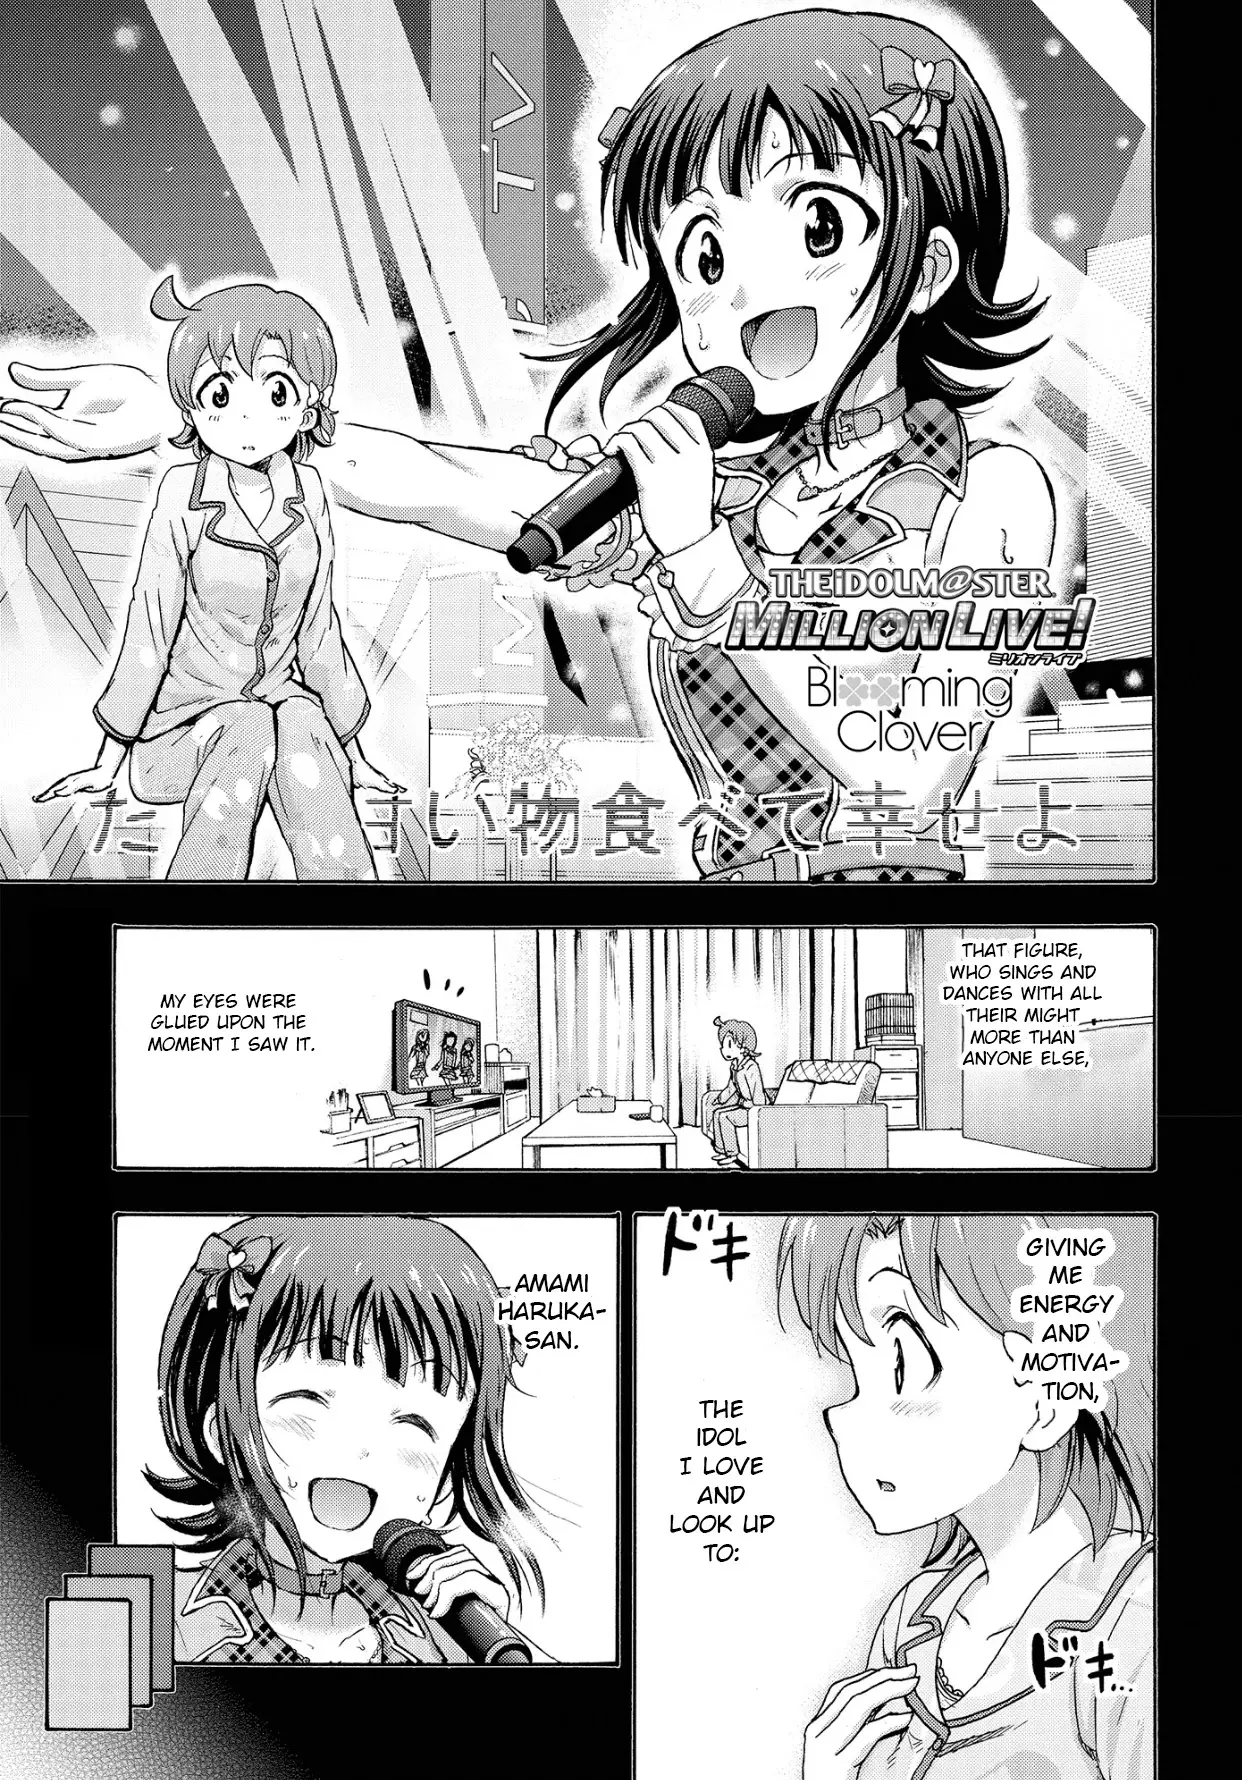 The Idolmaster Million Live! Blooming Clover - 10 page 1-1f227657